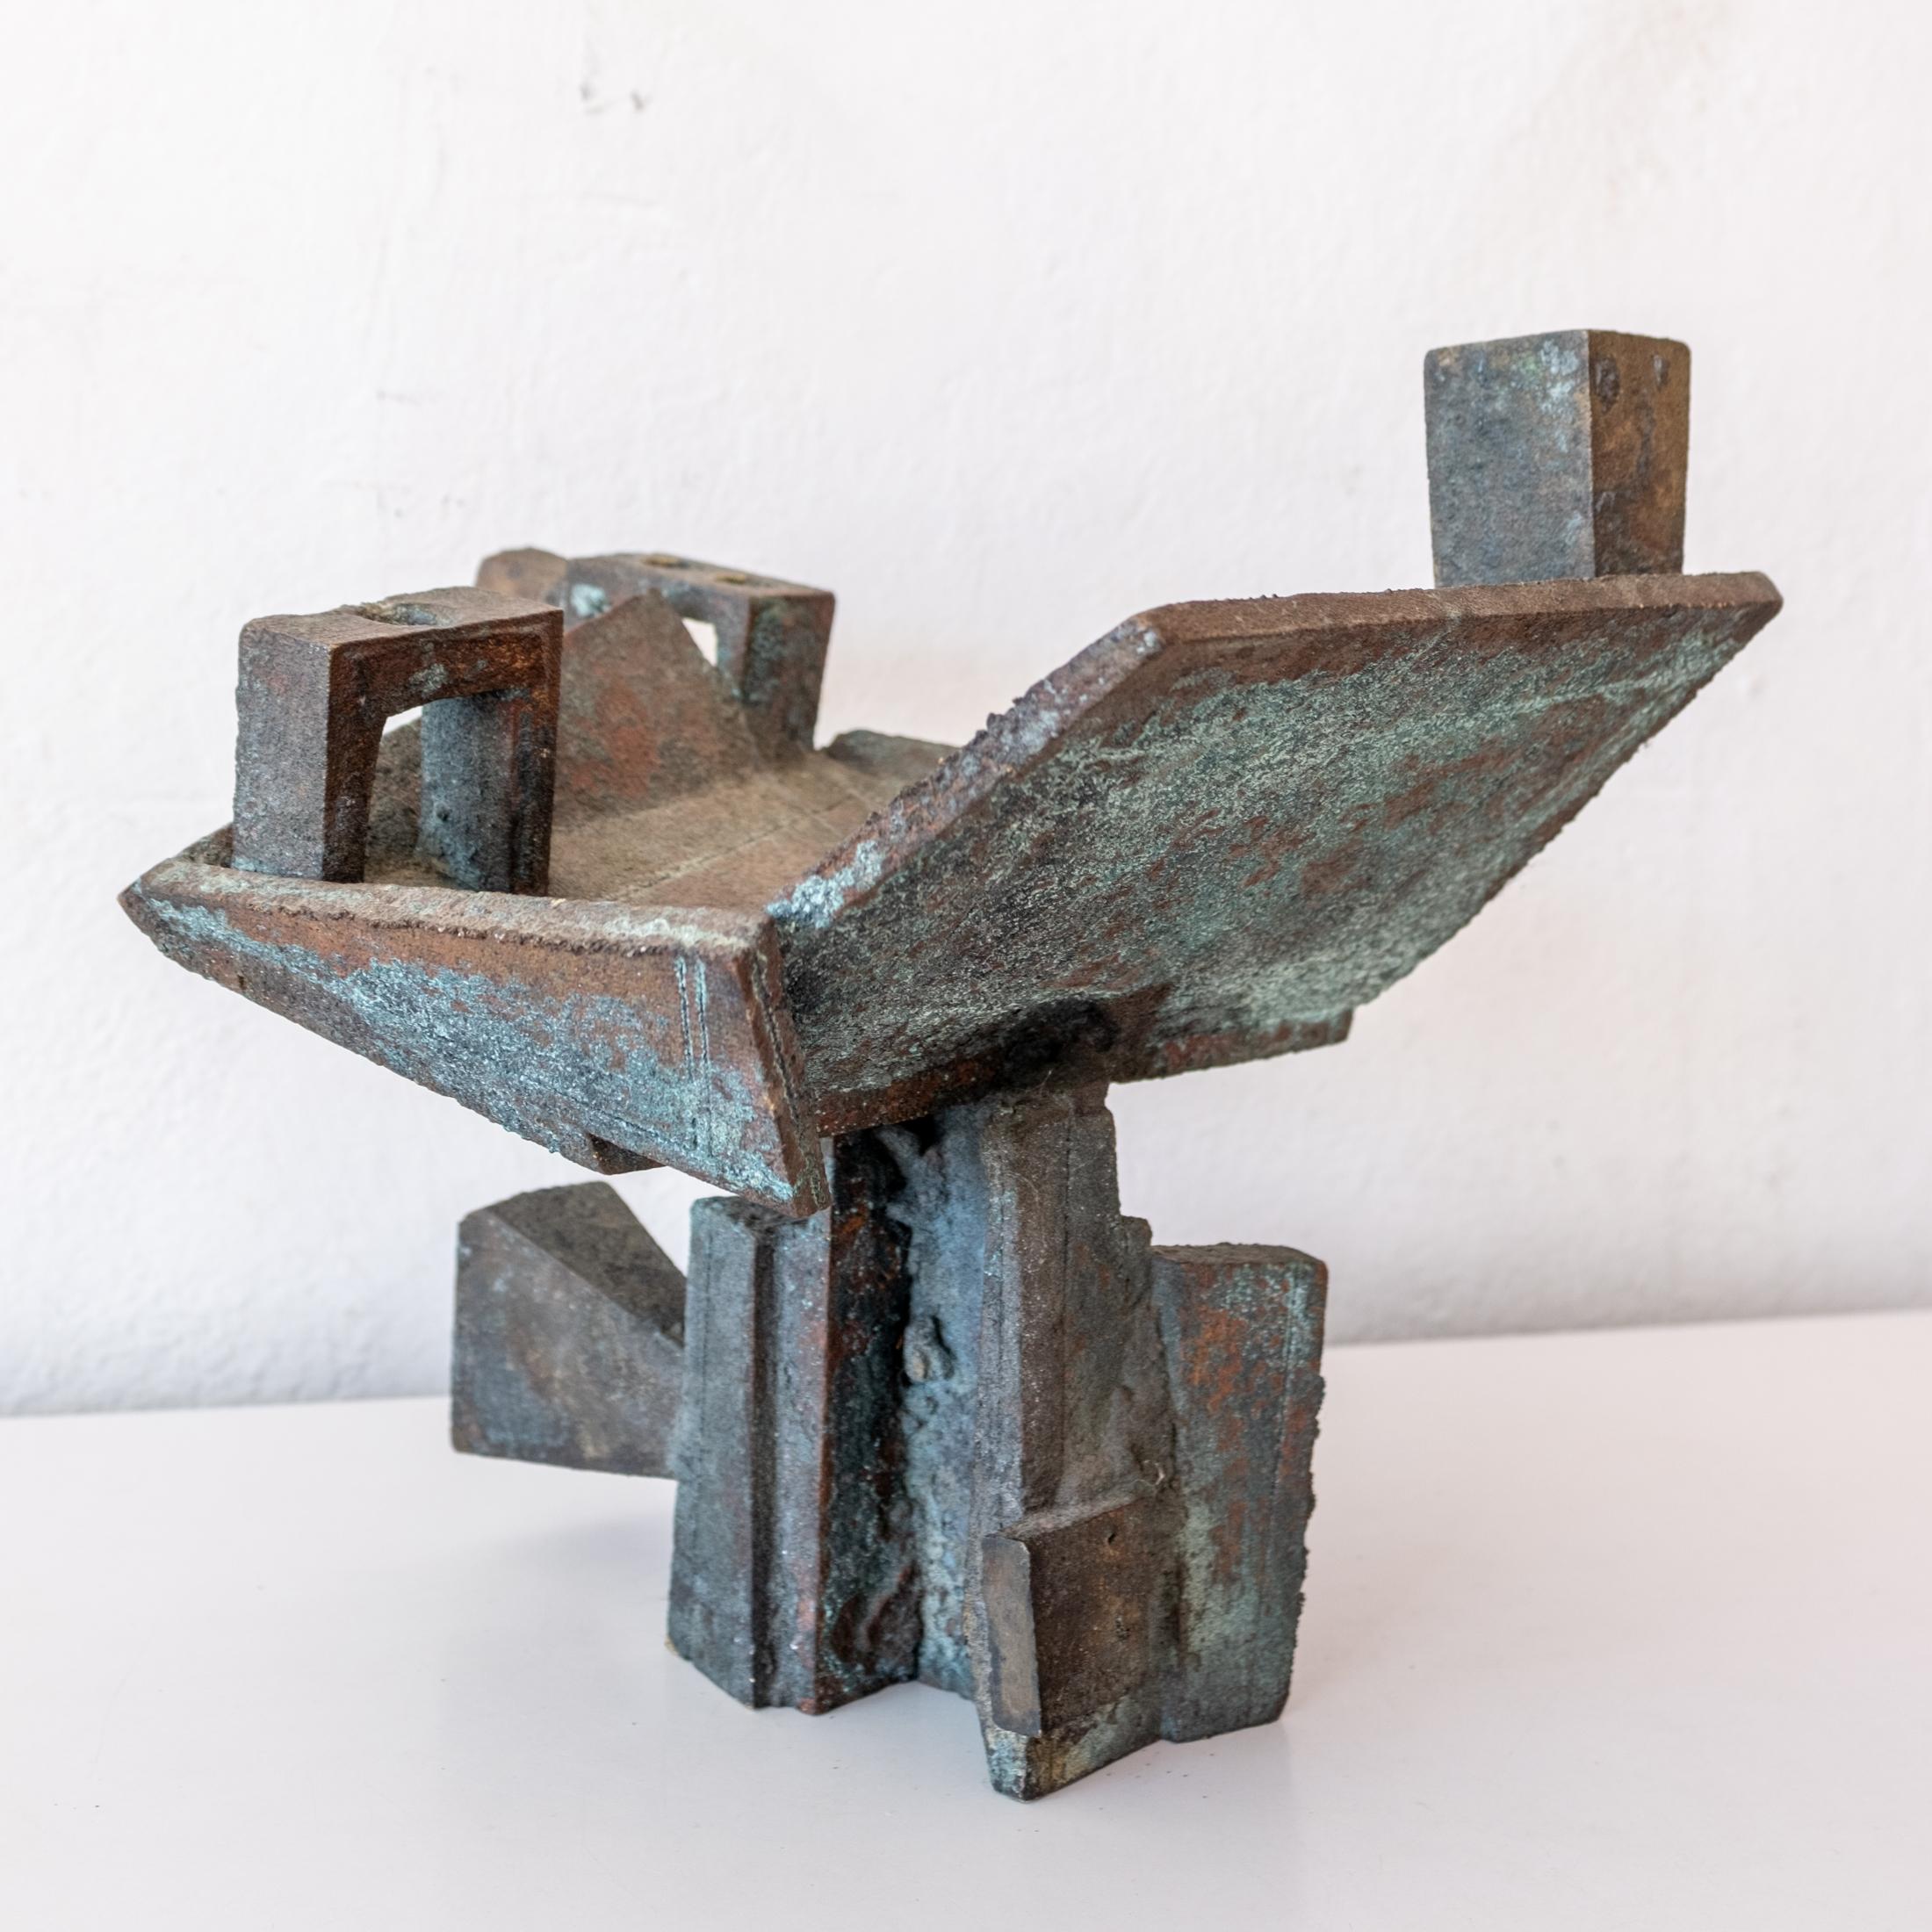 Vintage bronze sculpture by Paolo Soleri. Classis Soleri incised decoration. Fantastic patina. Works of this size are exceeding difficult to find. 1960s.

Provenance: Los Angeles Modern Auctions, 2009

Paolo Soleri (1919-2013), the founder of